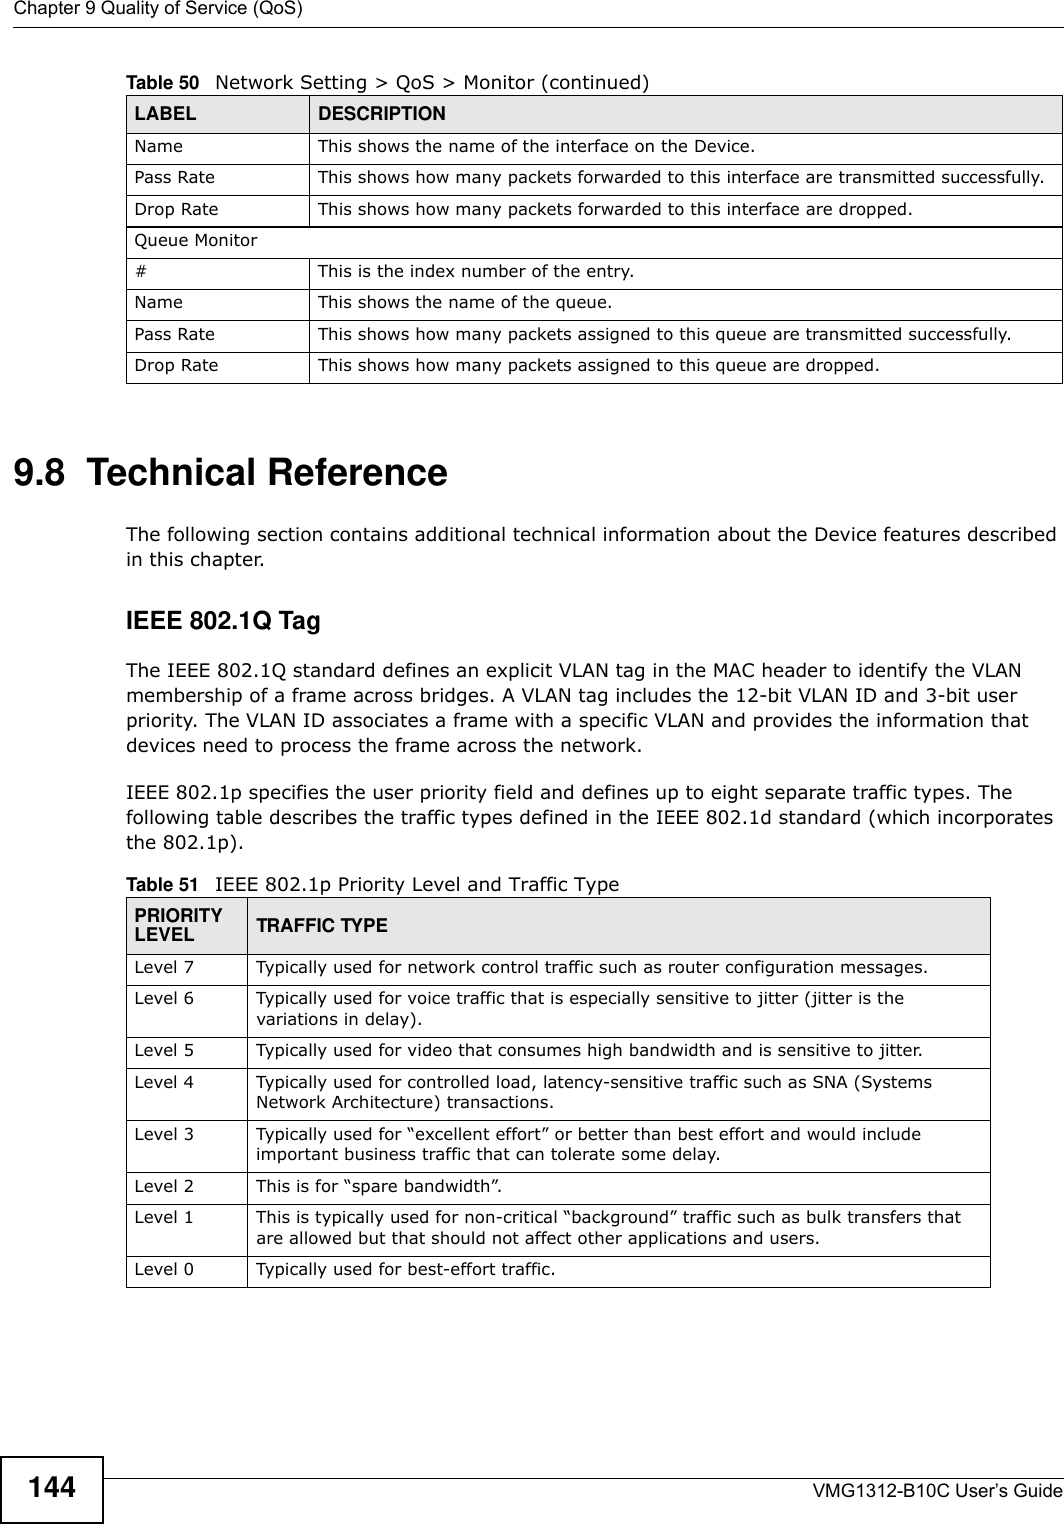 Chapter 9 Quality of Service (QoS)VMG1312-B10C User’s Guide1449.8  Technical ReferenceThe following section contains additional technical information about the Device features described in this chapter.IEEE 802.1Q TagThe IEEE 802.1Q standard defines an explicit VLAN tag in the MAC header to identify the VLAN membership of a frame across bridges. A VLAN tag includes the 12-bit VLAN ID and 3-bit user priority. The VLAN ID associates a frame with a specific VLAN and provides the information that devices need to process the frame across the network. IEEE 802.1p specifies the user priority field and defines up to eight separate traffic types. The following table describes the traffic types defined in the IEEE 802.1d standard (which incorporates the 802.1p).  Name This shows the name of the interface on the Device. Pass Rate This shows how many packets forwarded to this interface are transmitted successfully.Drop Rate This shows how many packets forwarded to this interface are dropped.Queue Monitor# This is the index number of the entry.Name This shows the name of the queue. Pass Rate This shows how many packets assigned to this queue are transmitted successfully.Drop Rate This shows how many packets assigned to this queue are dropped.Table 50   Network Setting &gt; QoS &gt; Monitor (continued)LABEL DESCRIPTIONTable 51   IEEE 802.1p Priority Level and Traffic TypePRIORITY LEVEL TRAFFIC TYPELevel 7 Typically used for network control traffic such as router configuration messages.Level 6 Typically used for voice traffic that is especially sensitive to jitter (jitter is the variations in delay).Level 5 Typically used for video that consumes high bandwidth and is sensitive to jitter.Level 4 Typically used for controlled load, latency-sensitive traffic such as SNA (Systems Network Architecture) transactions.Level 3 Typically used for “excellent effort” or better than best effort and would include important business traffic that can tolerate some delay.Level 2 This is for “spare bandwidth”. Level 1 This is typically used for non-critical “background” traffic such as bulk transfers that are allowed but that should not affect other applications and users. Level 0 Typically used for best-effort traffic.